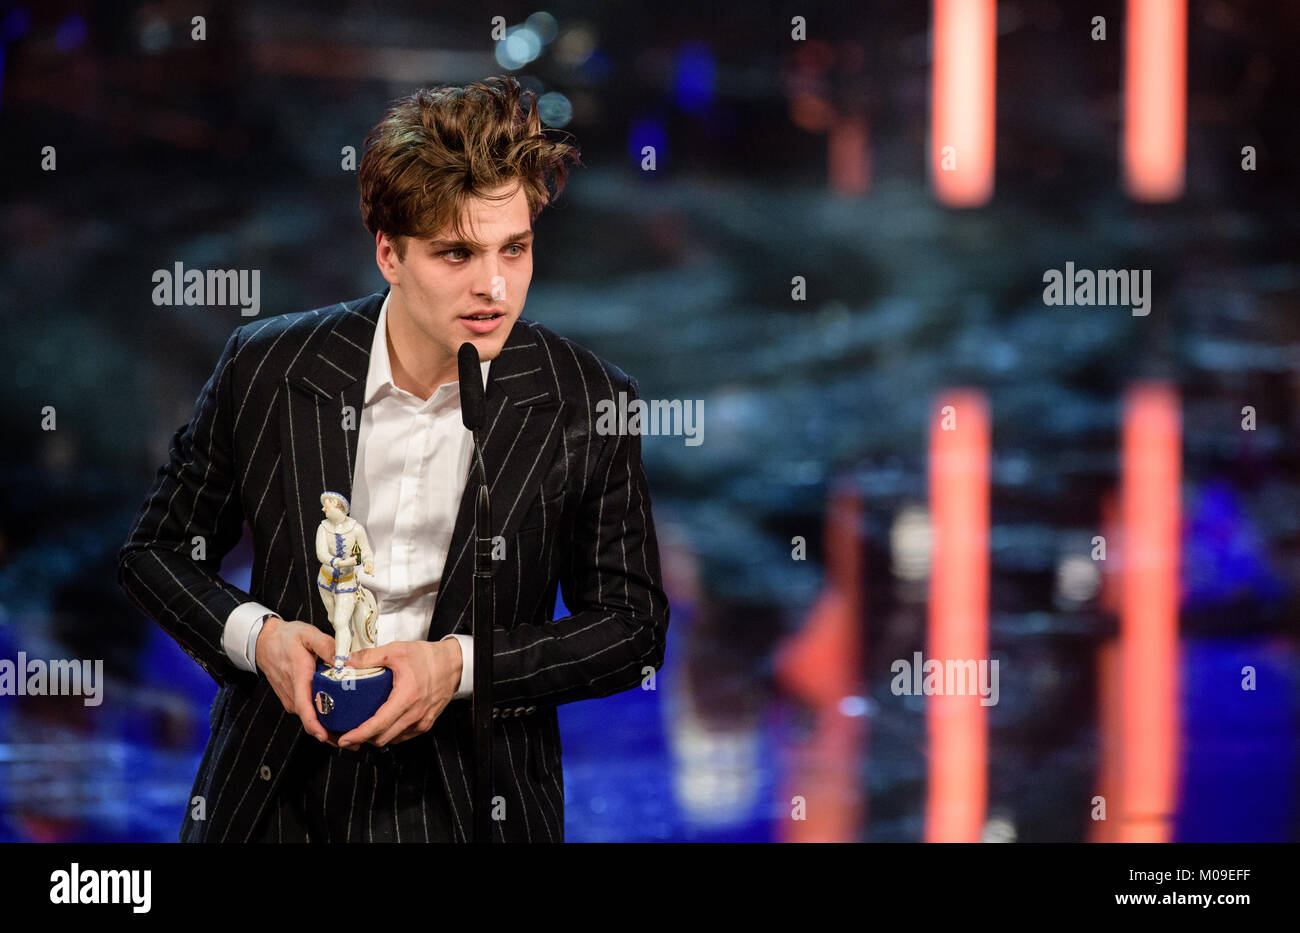 Munich, Germany. 19th Jan, 2018. Actor Jonas Dassler gives thanks onstage during the award ceremony of the 39th Bavarian Film Award at the Prince Regent Theatre in Munich, Germany, 19 January 2018. He received the newcomer award for 'Lomo' and 'Das schweigende Klassenzimmer' ('lit. the silent classroom). Credit: Matthias Balk/dpa/Alamy Live News Stock Photo